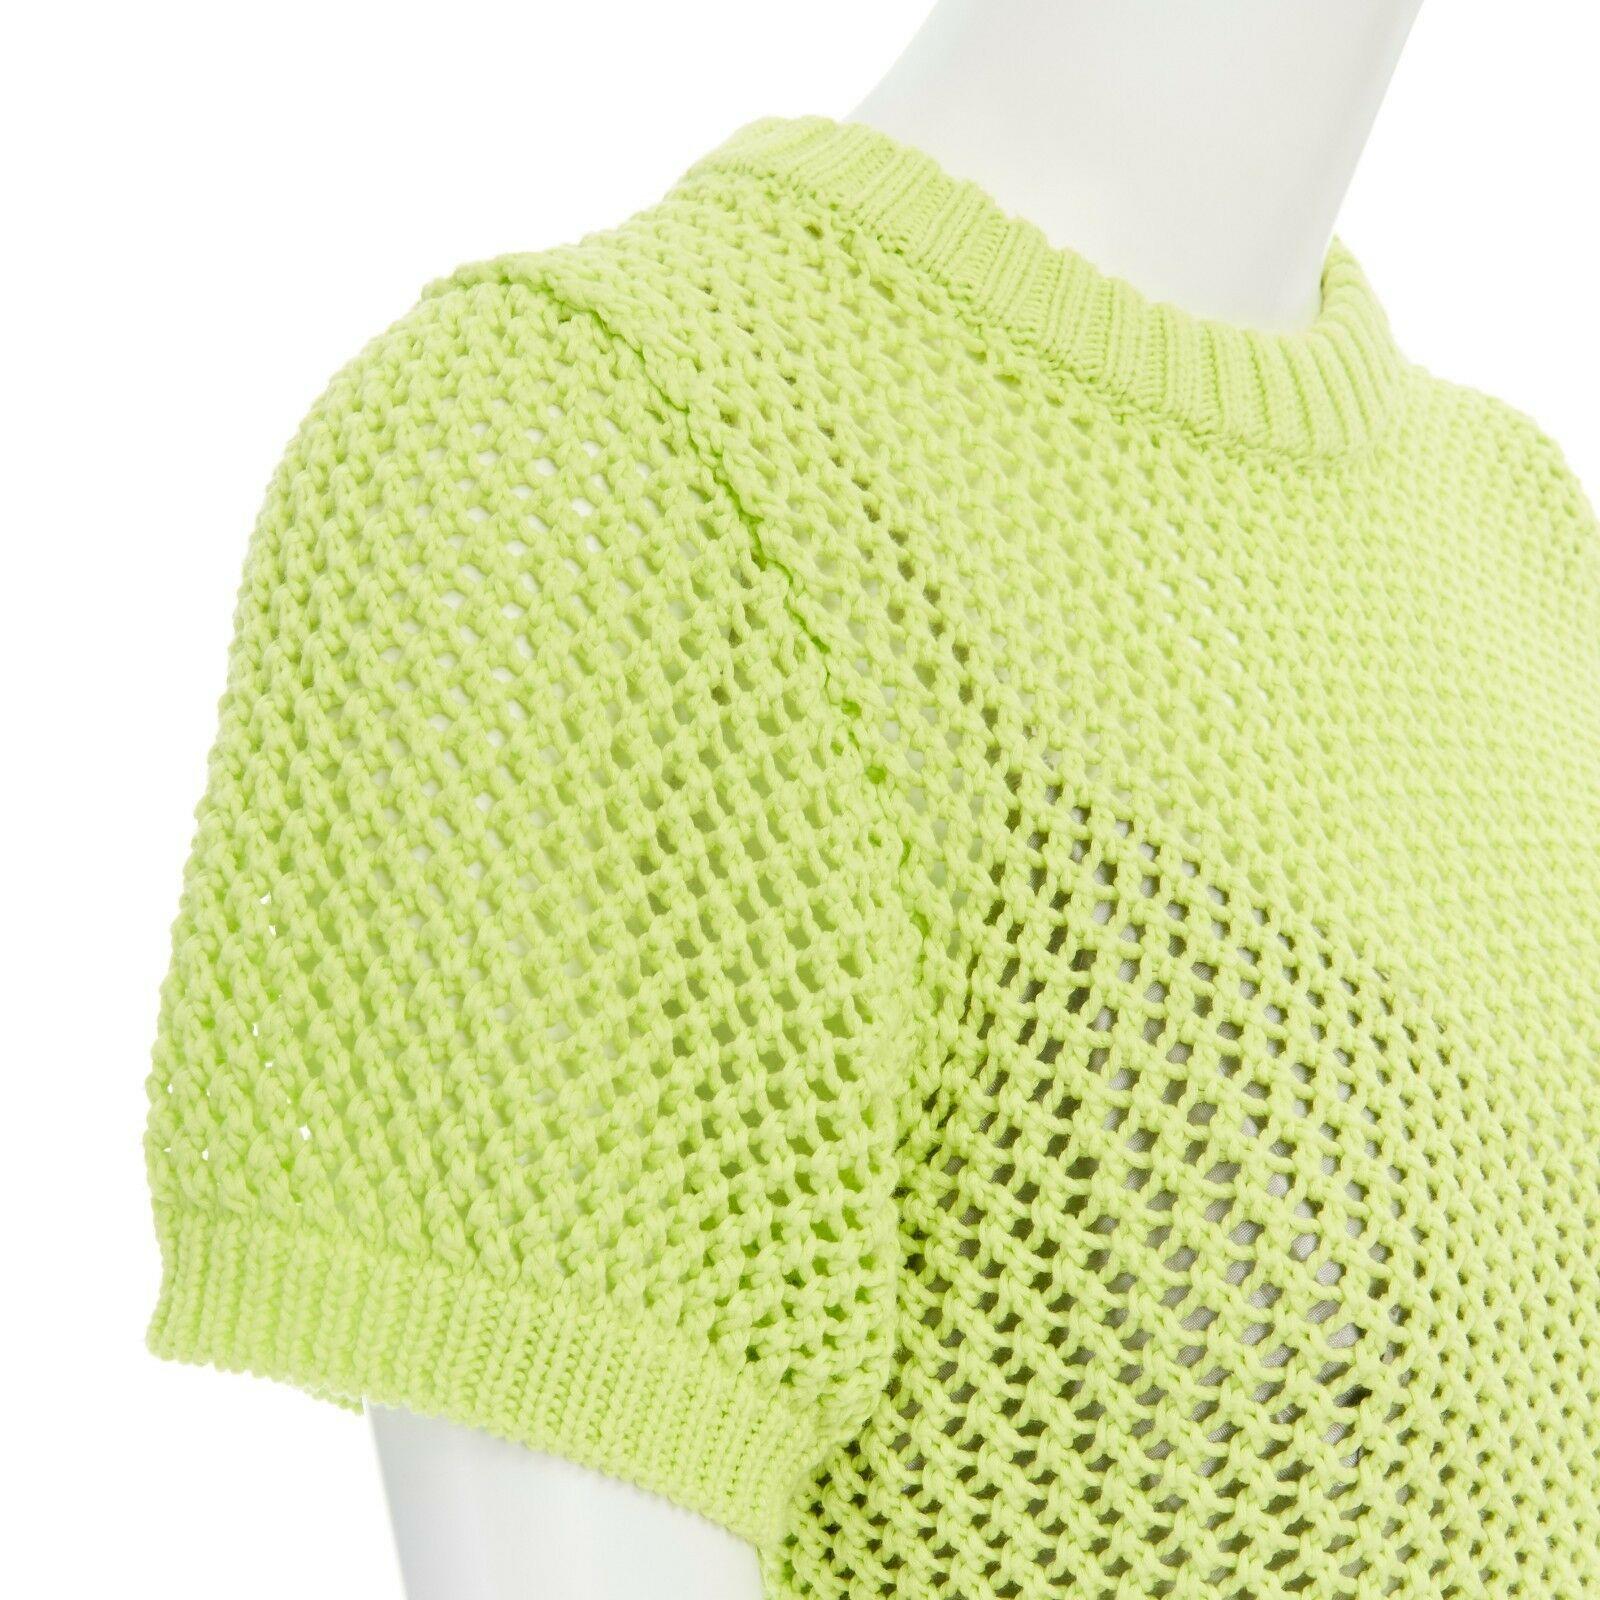 SACAI LUCK neon yellow grey lace trimmed camisole crochet knit sweater top JP3 L 3